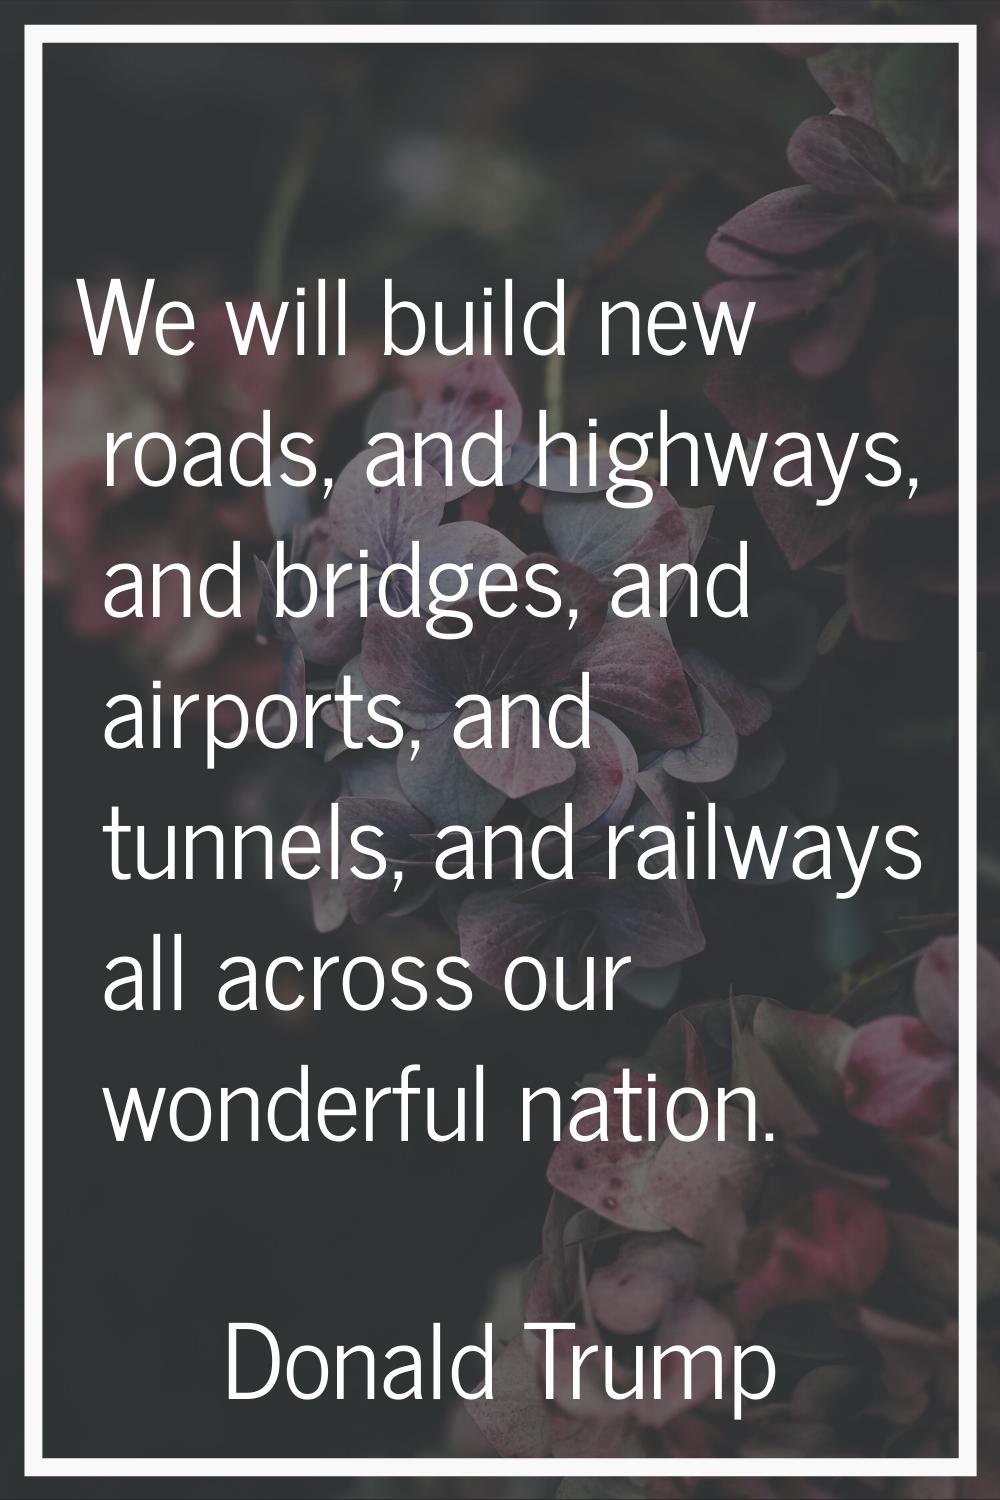 We will build new roads, and highways, and bridges, and airports, and tunnels, and railways all acr